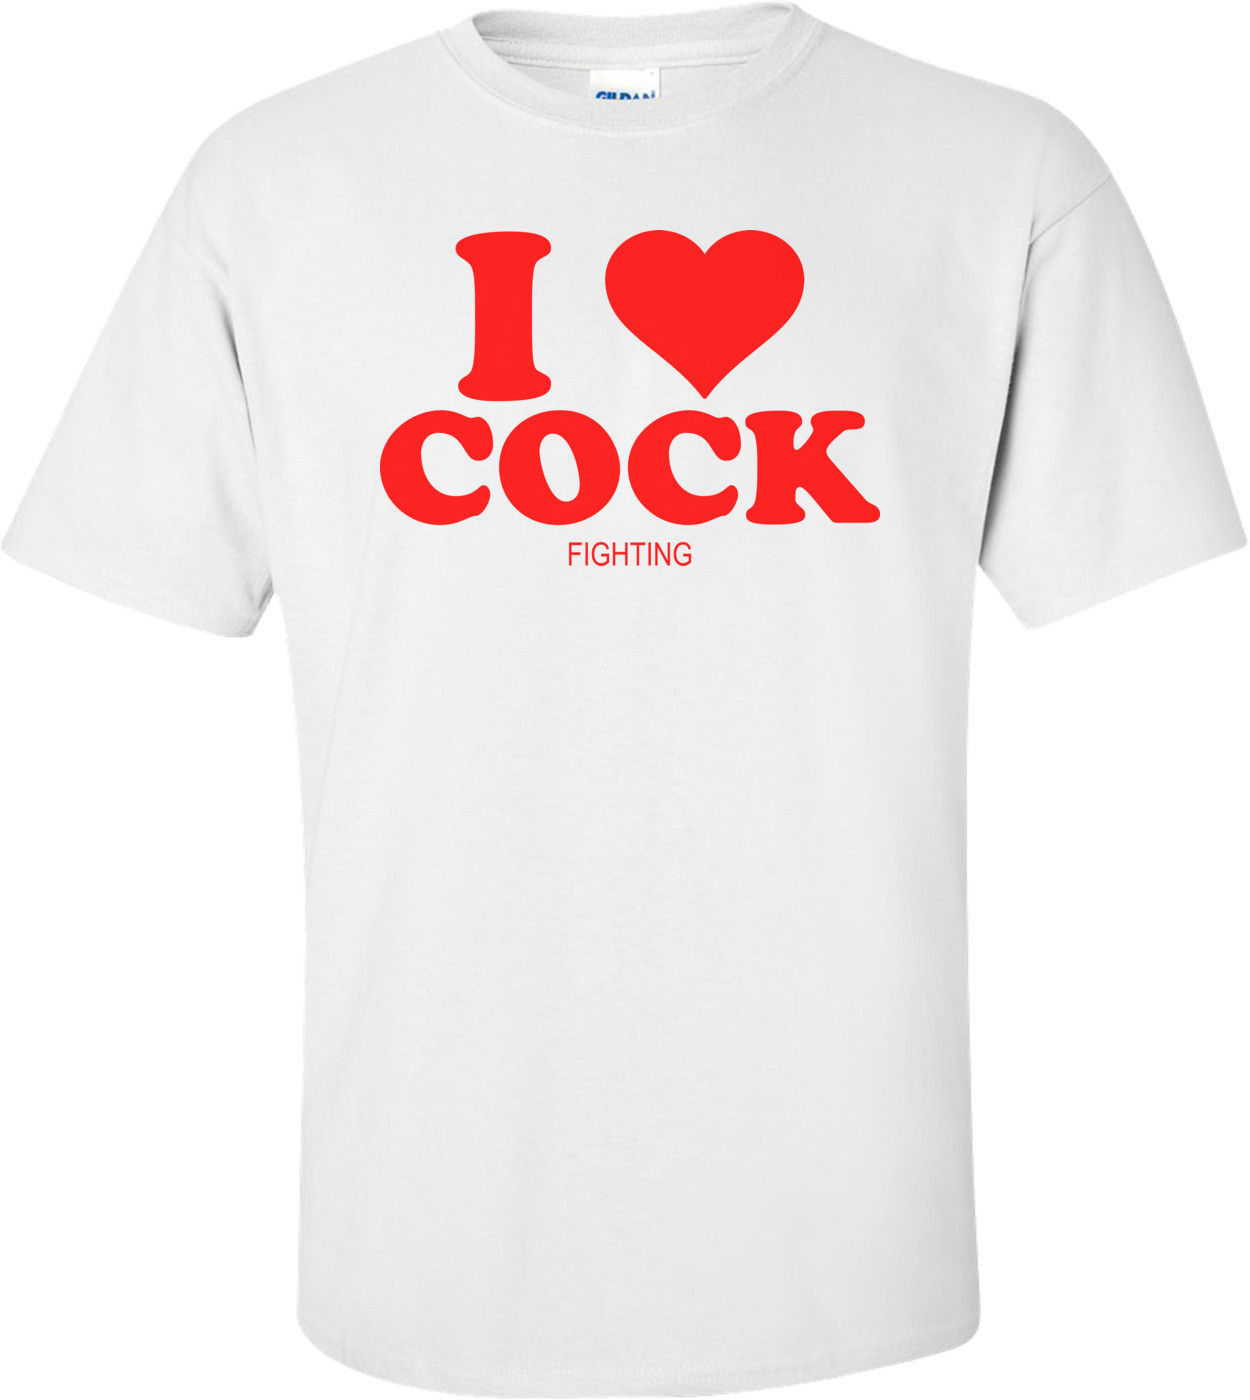 I Love Cock... Fighting Funny Shirt